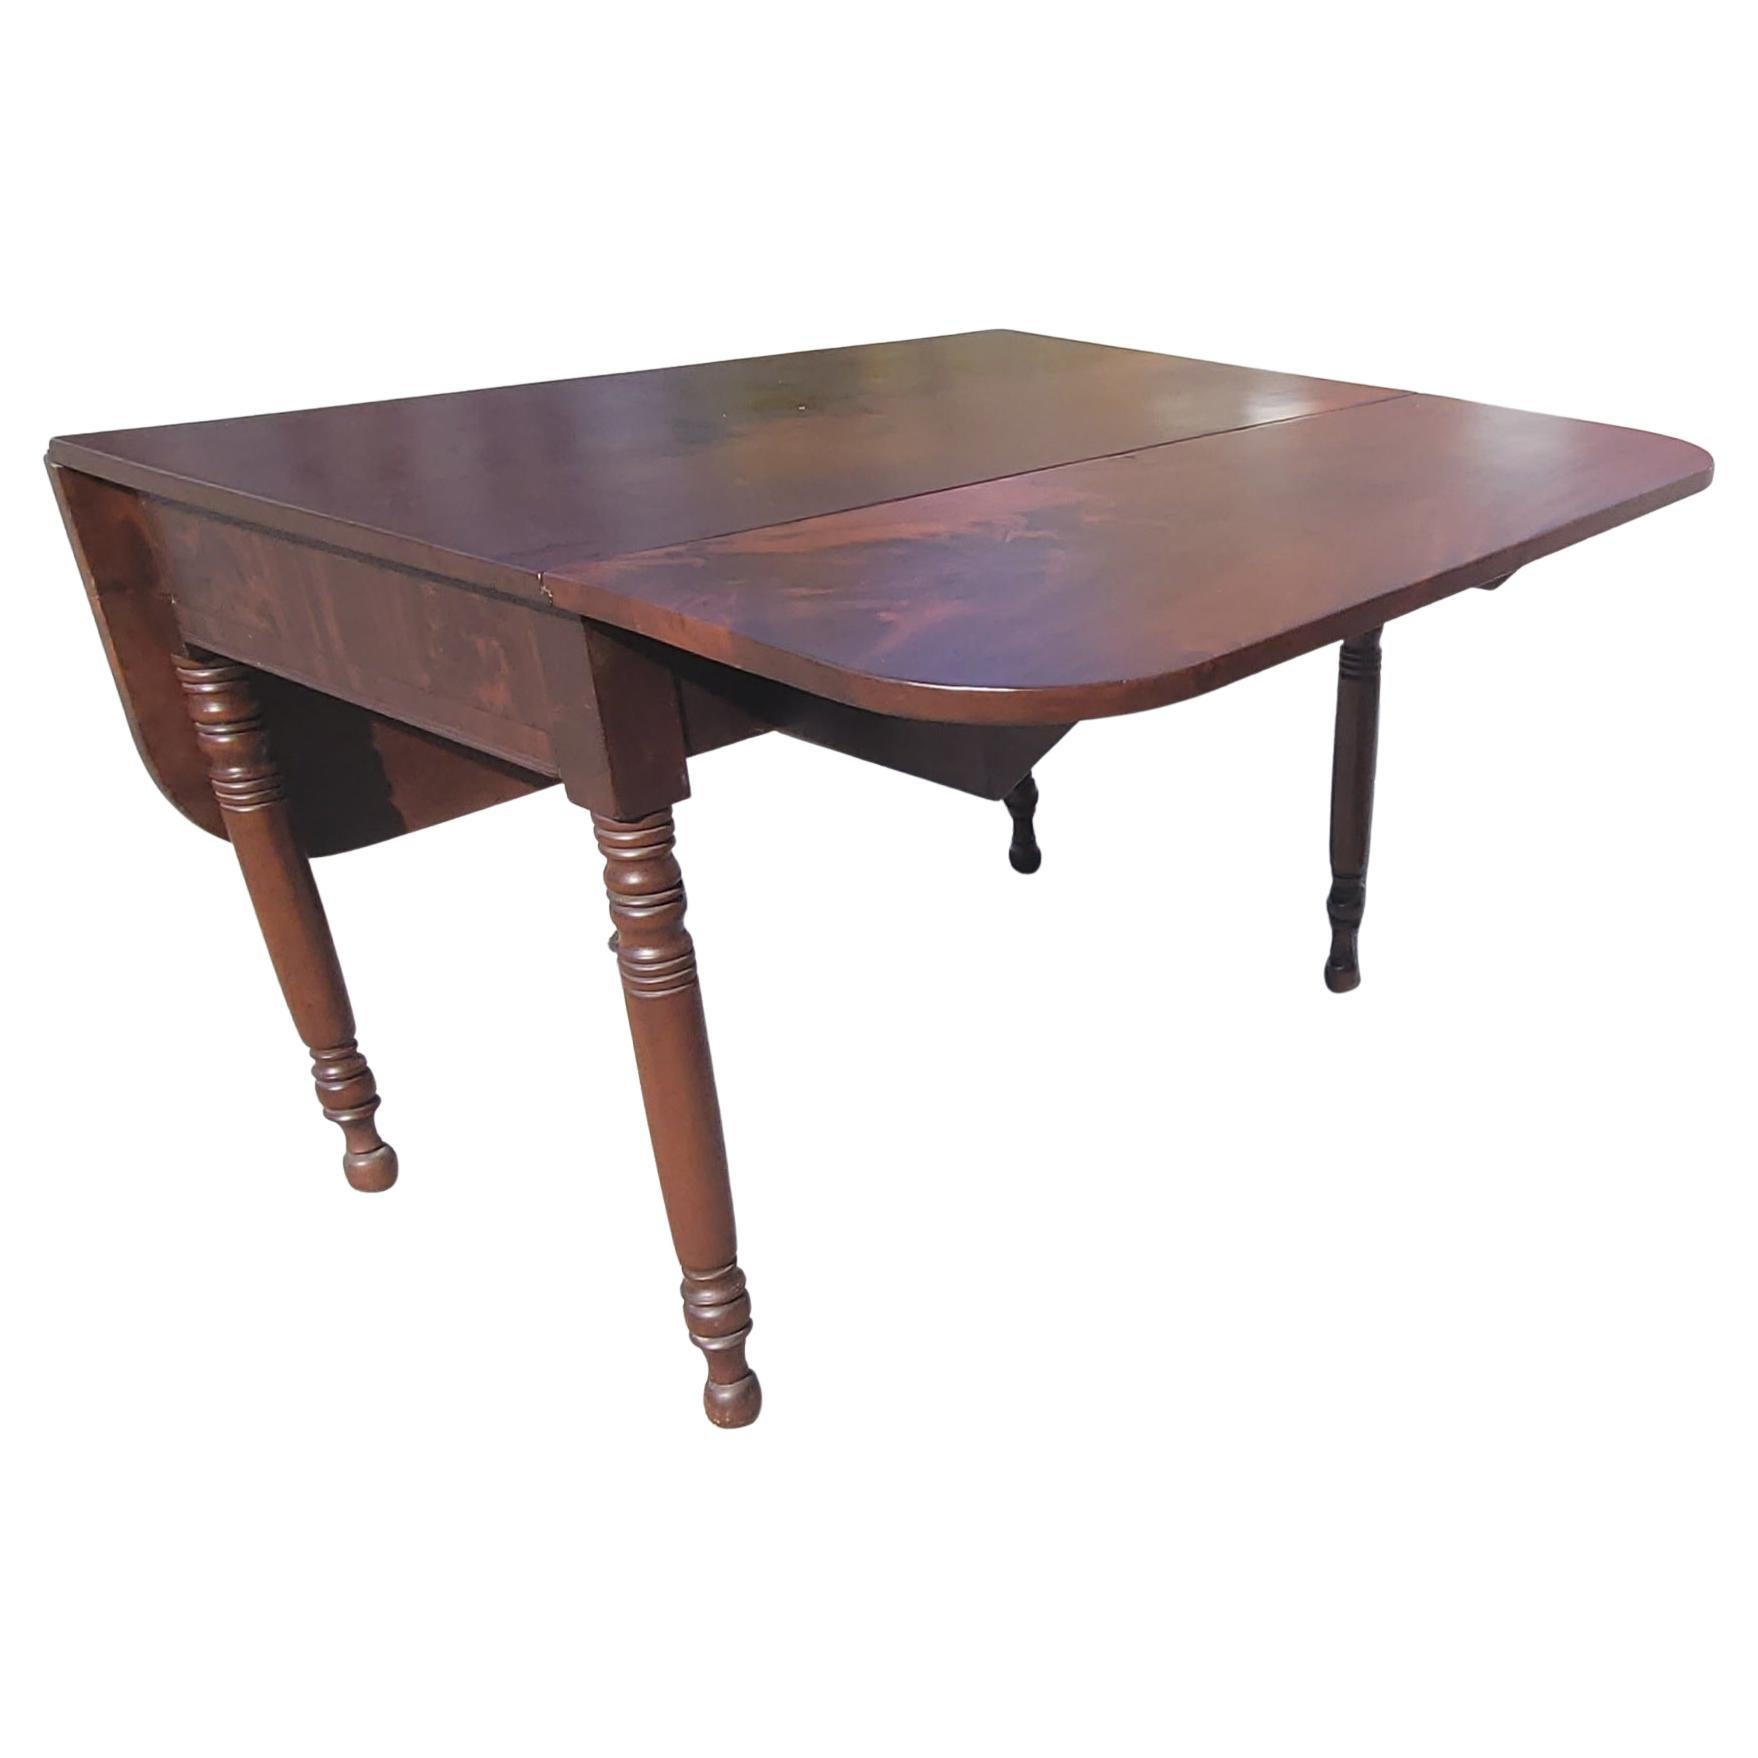 19th Century American Empire Federal Flame Mahogany Drop-Leaf Dining Table For Sale 2